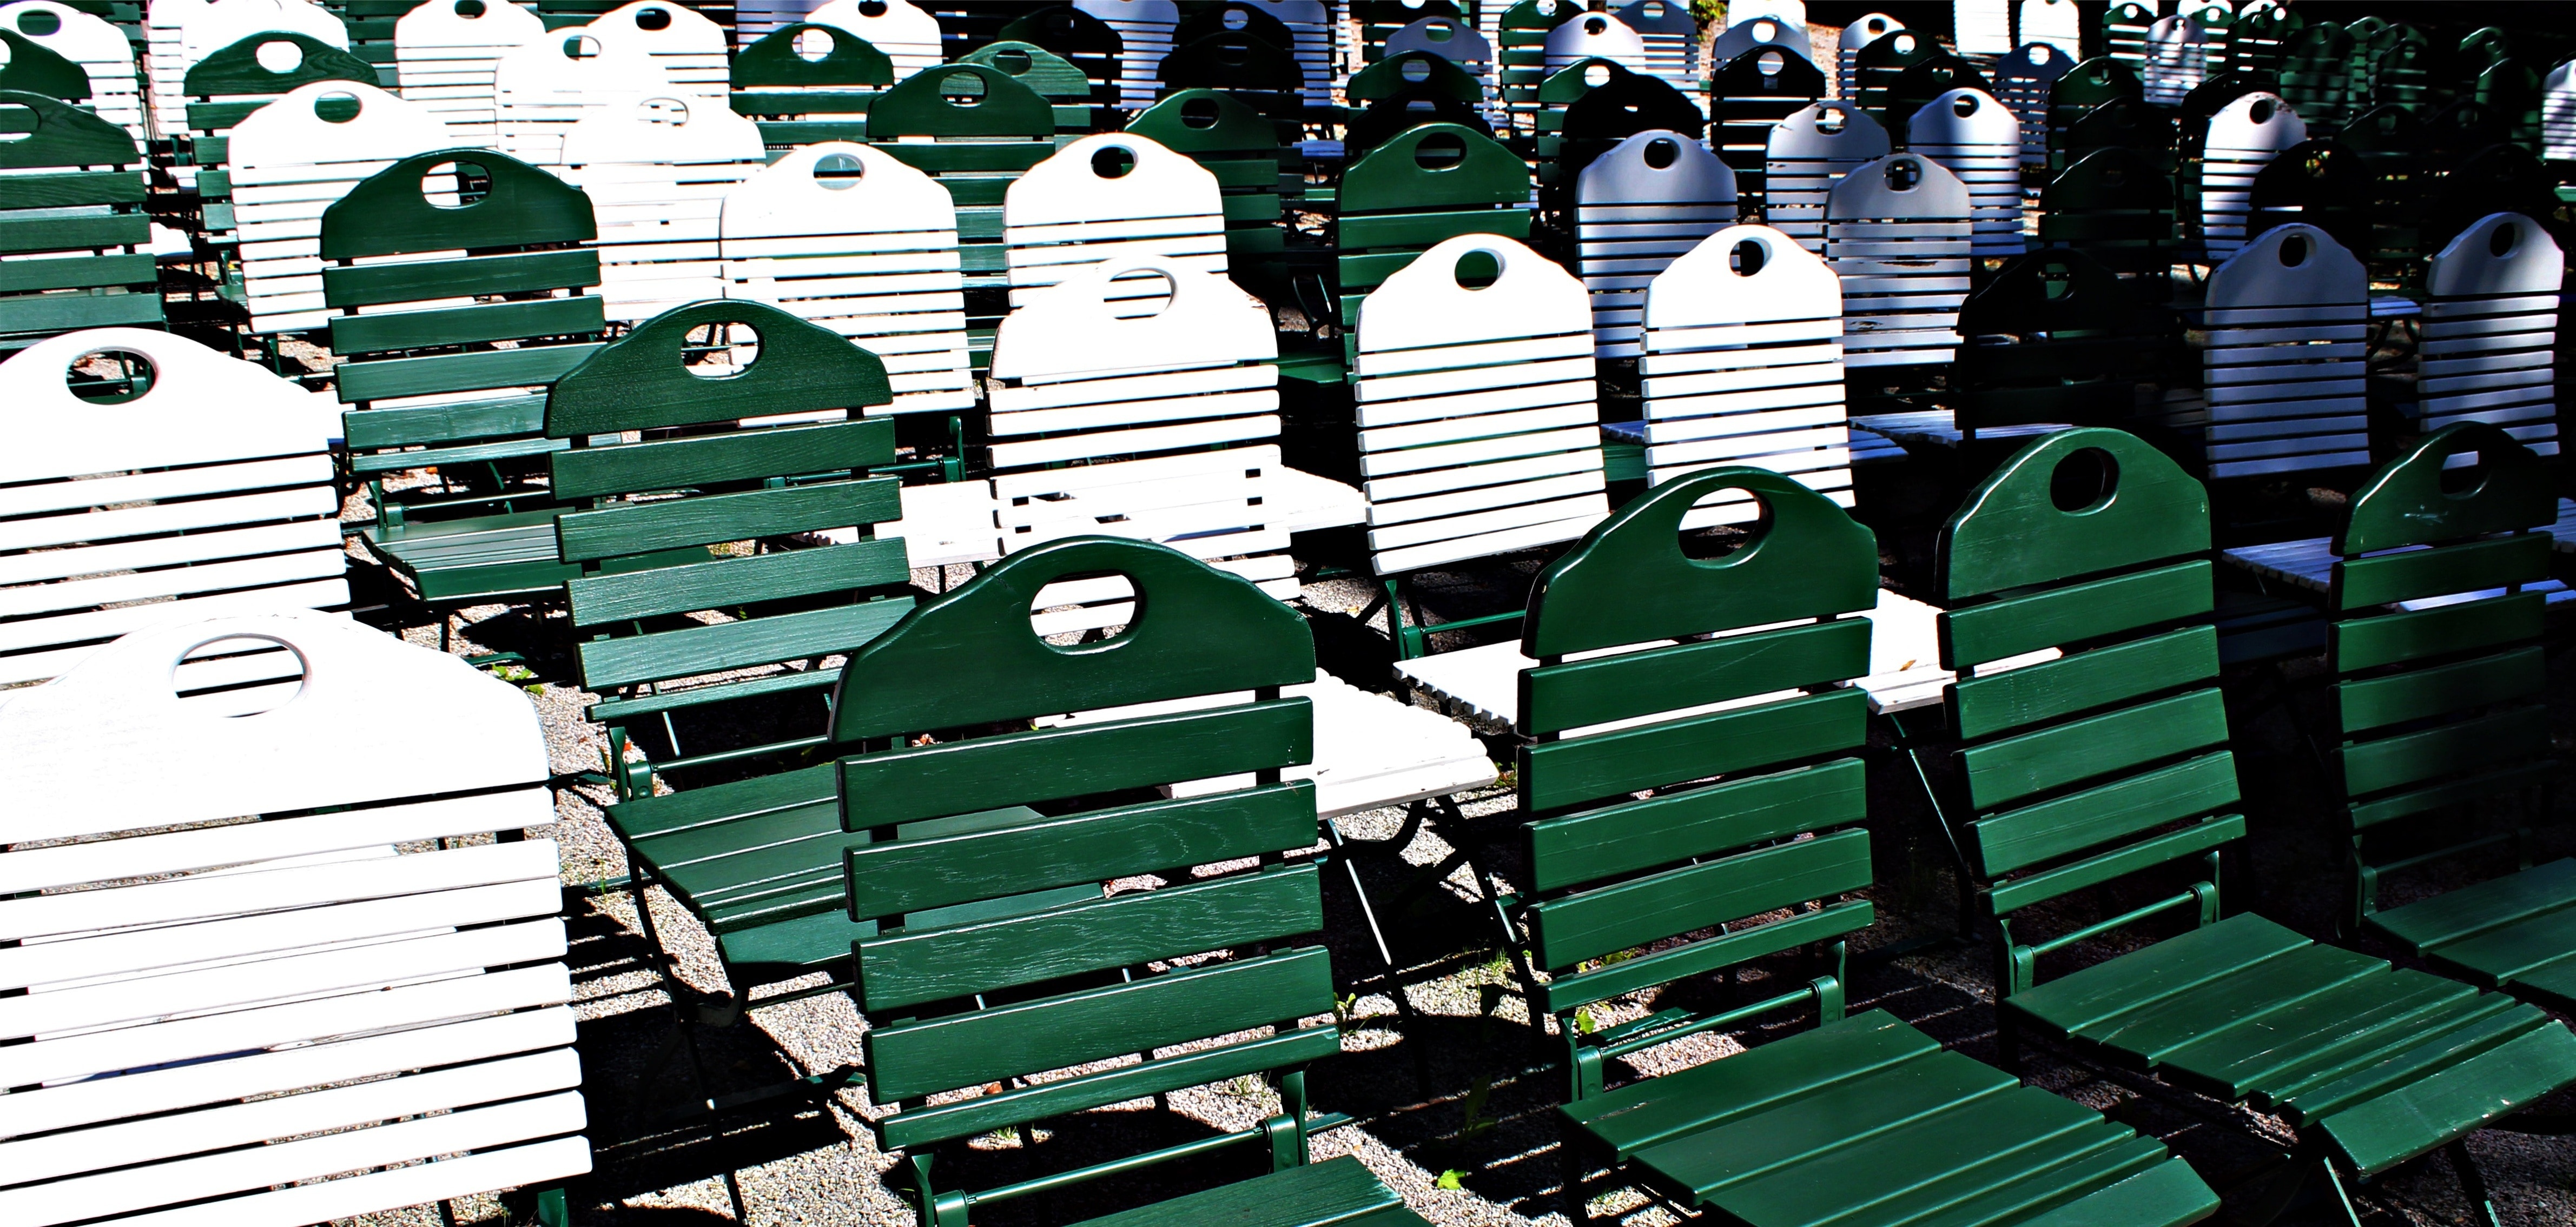 assorted patio chairs shown